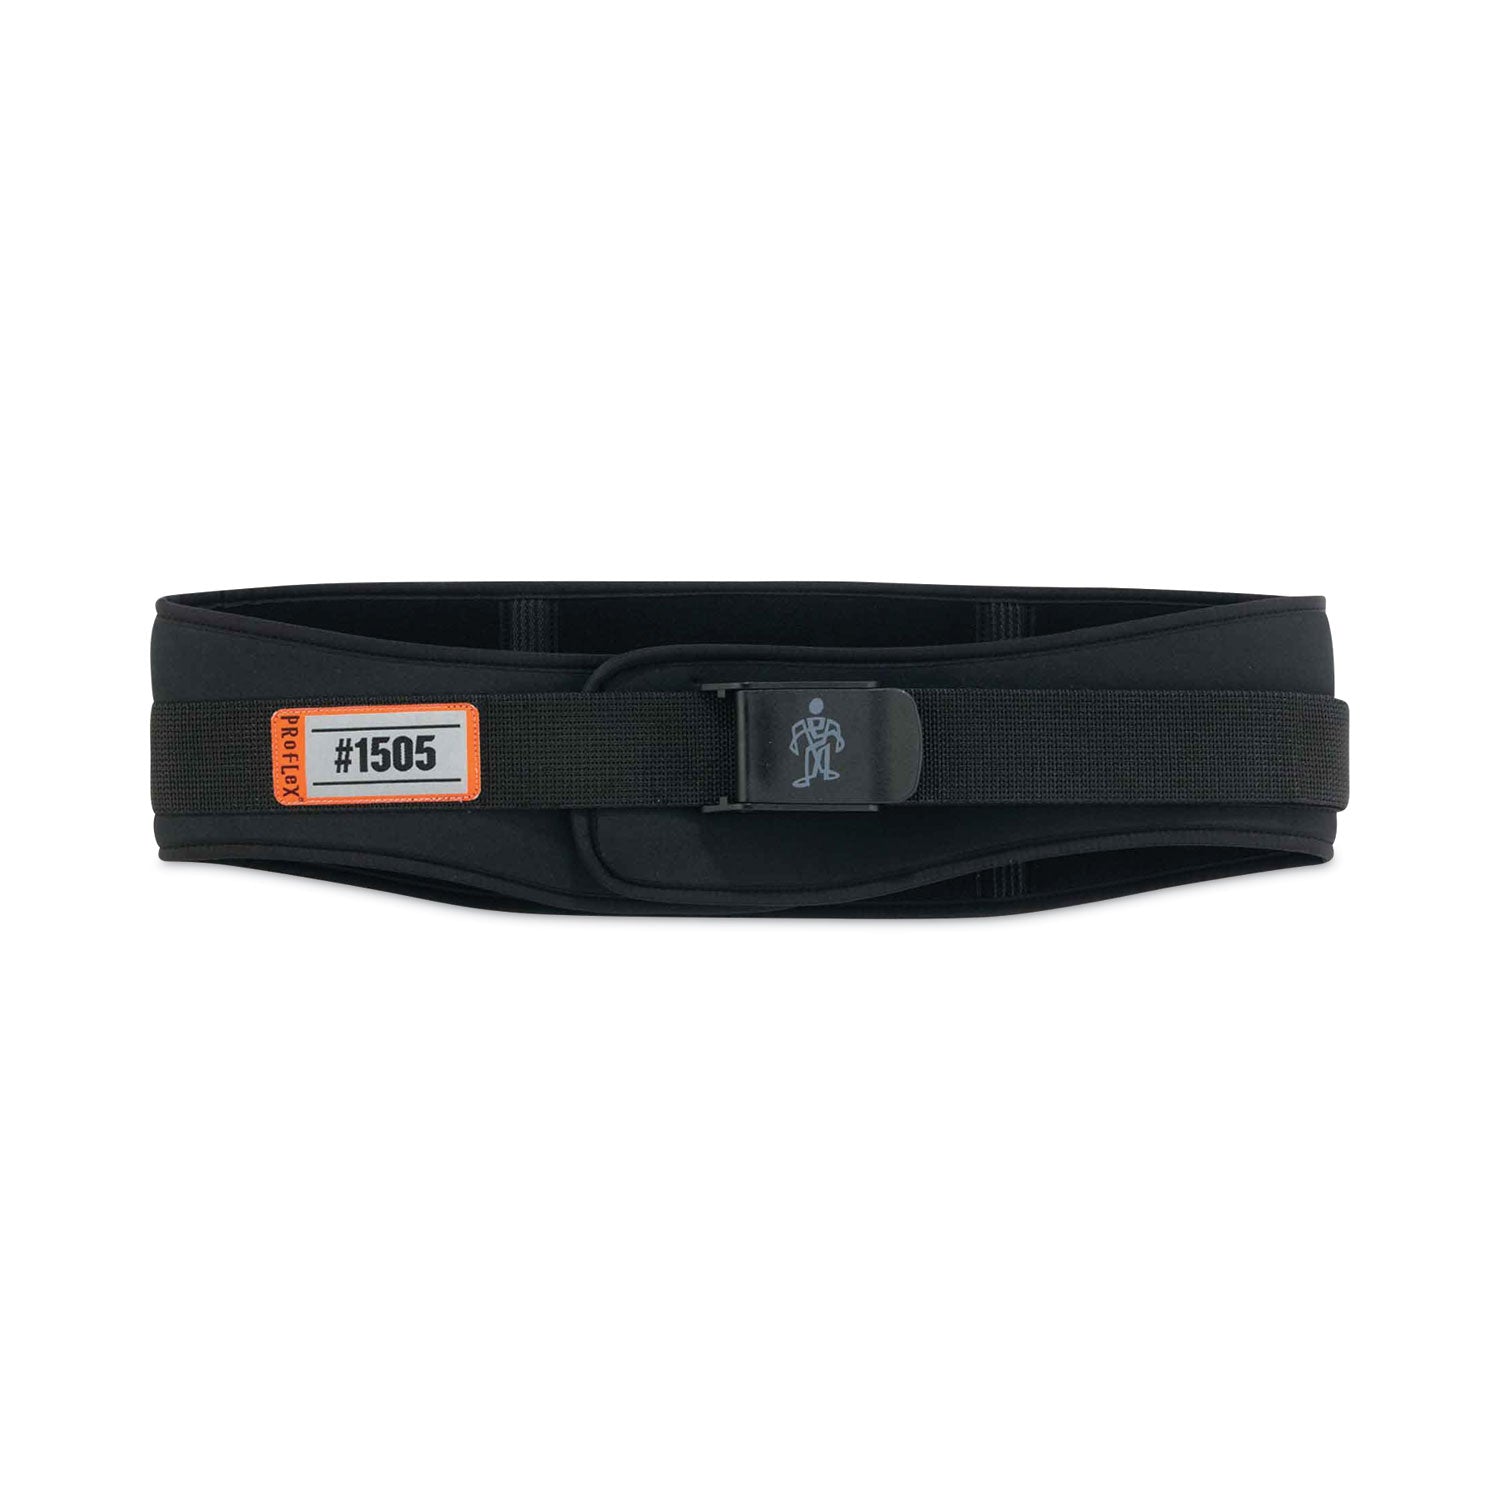 proflex-1505-low-profile-weight-lifters-back-support-belt-medium-30-to-34-waist-black-ships-in-1-3-business-days_ego11492 - 4